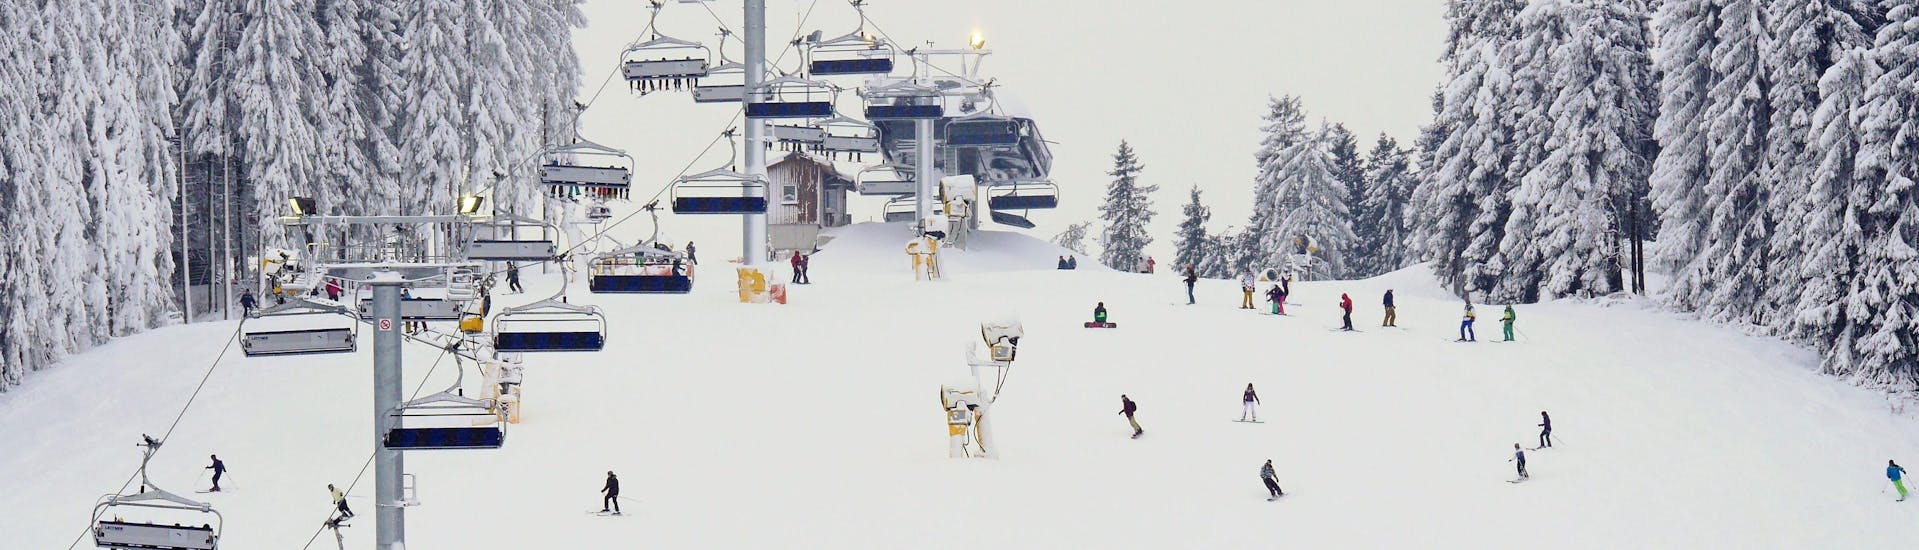 Skiers on the slopes of Winterberg.